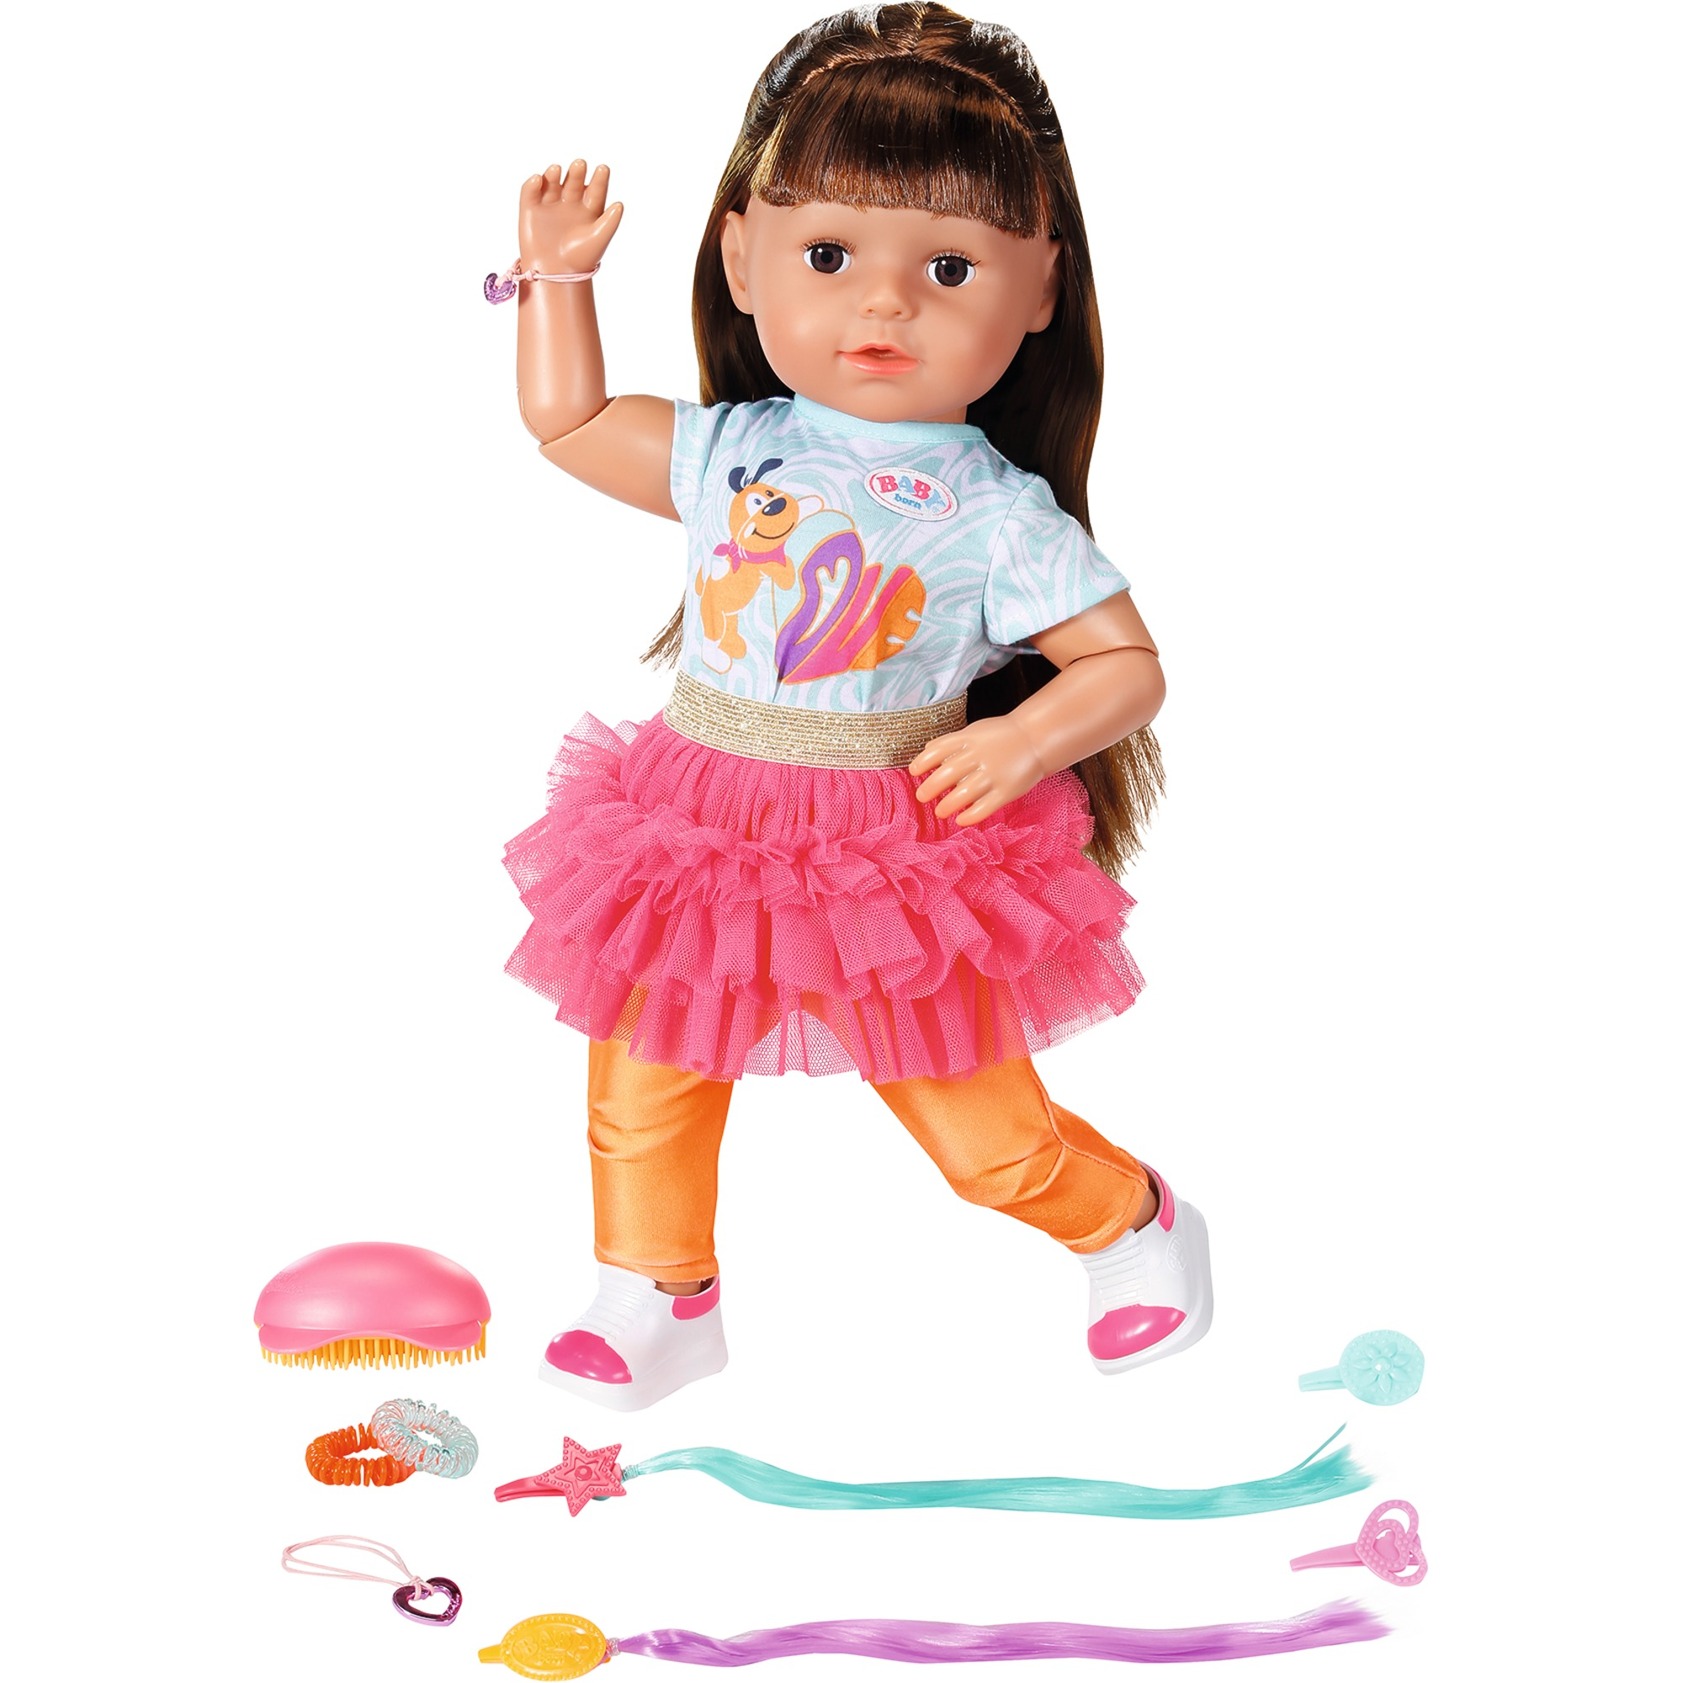 BABY born® Sister Play & Style brunette 43 cm, Puppe